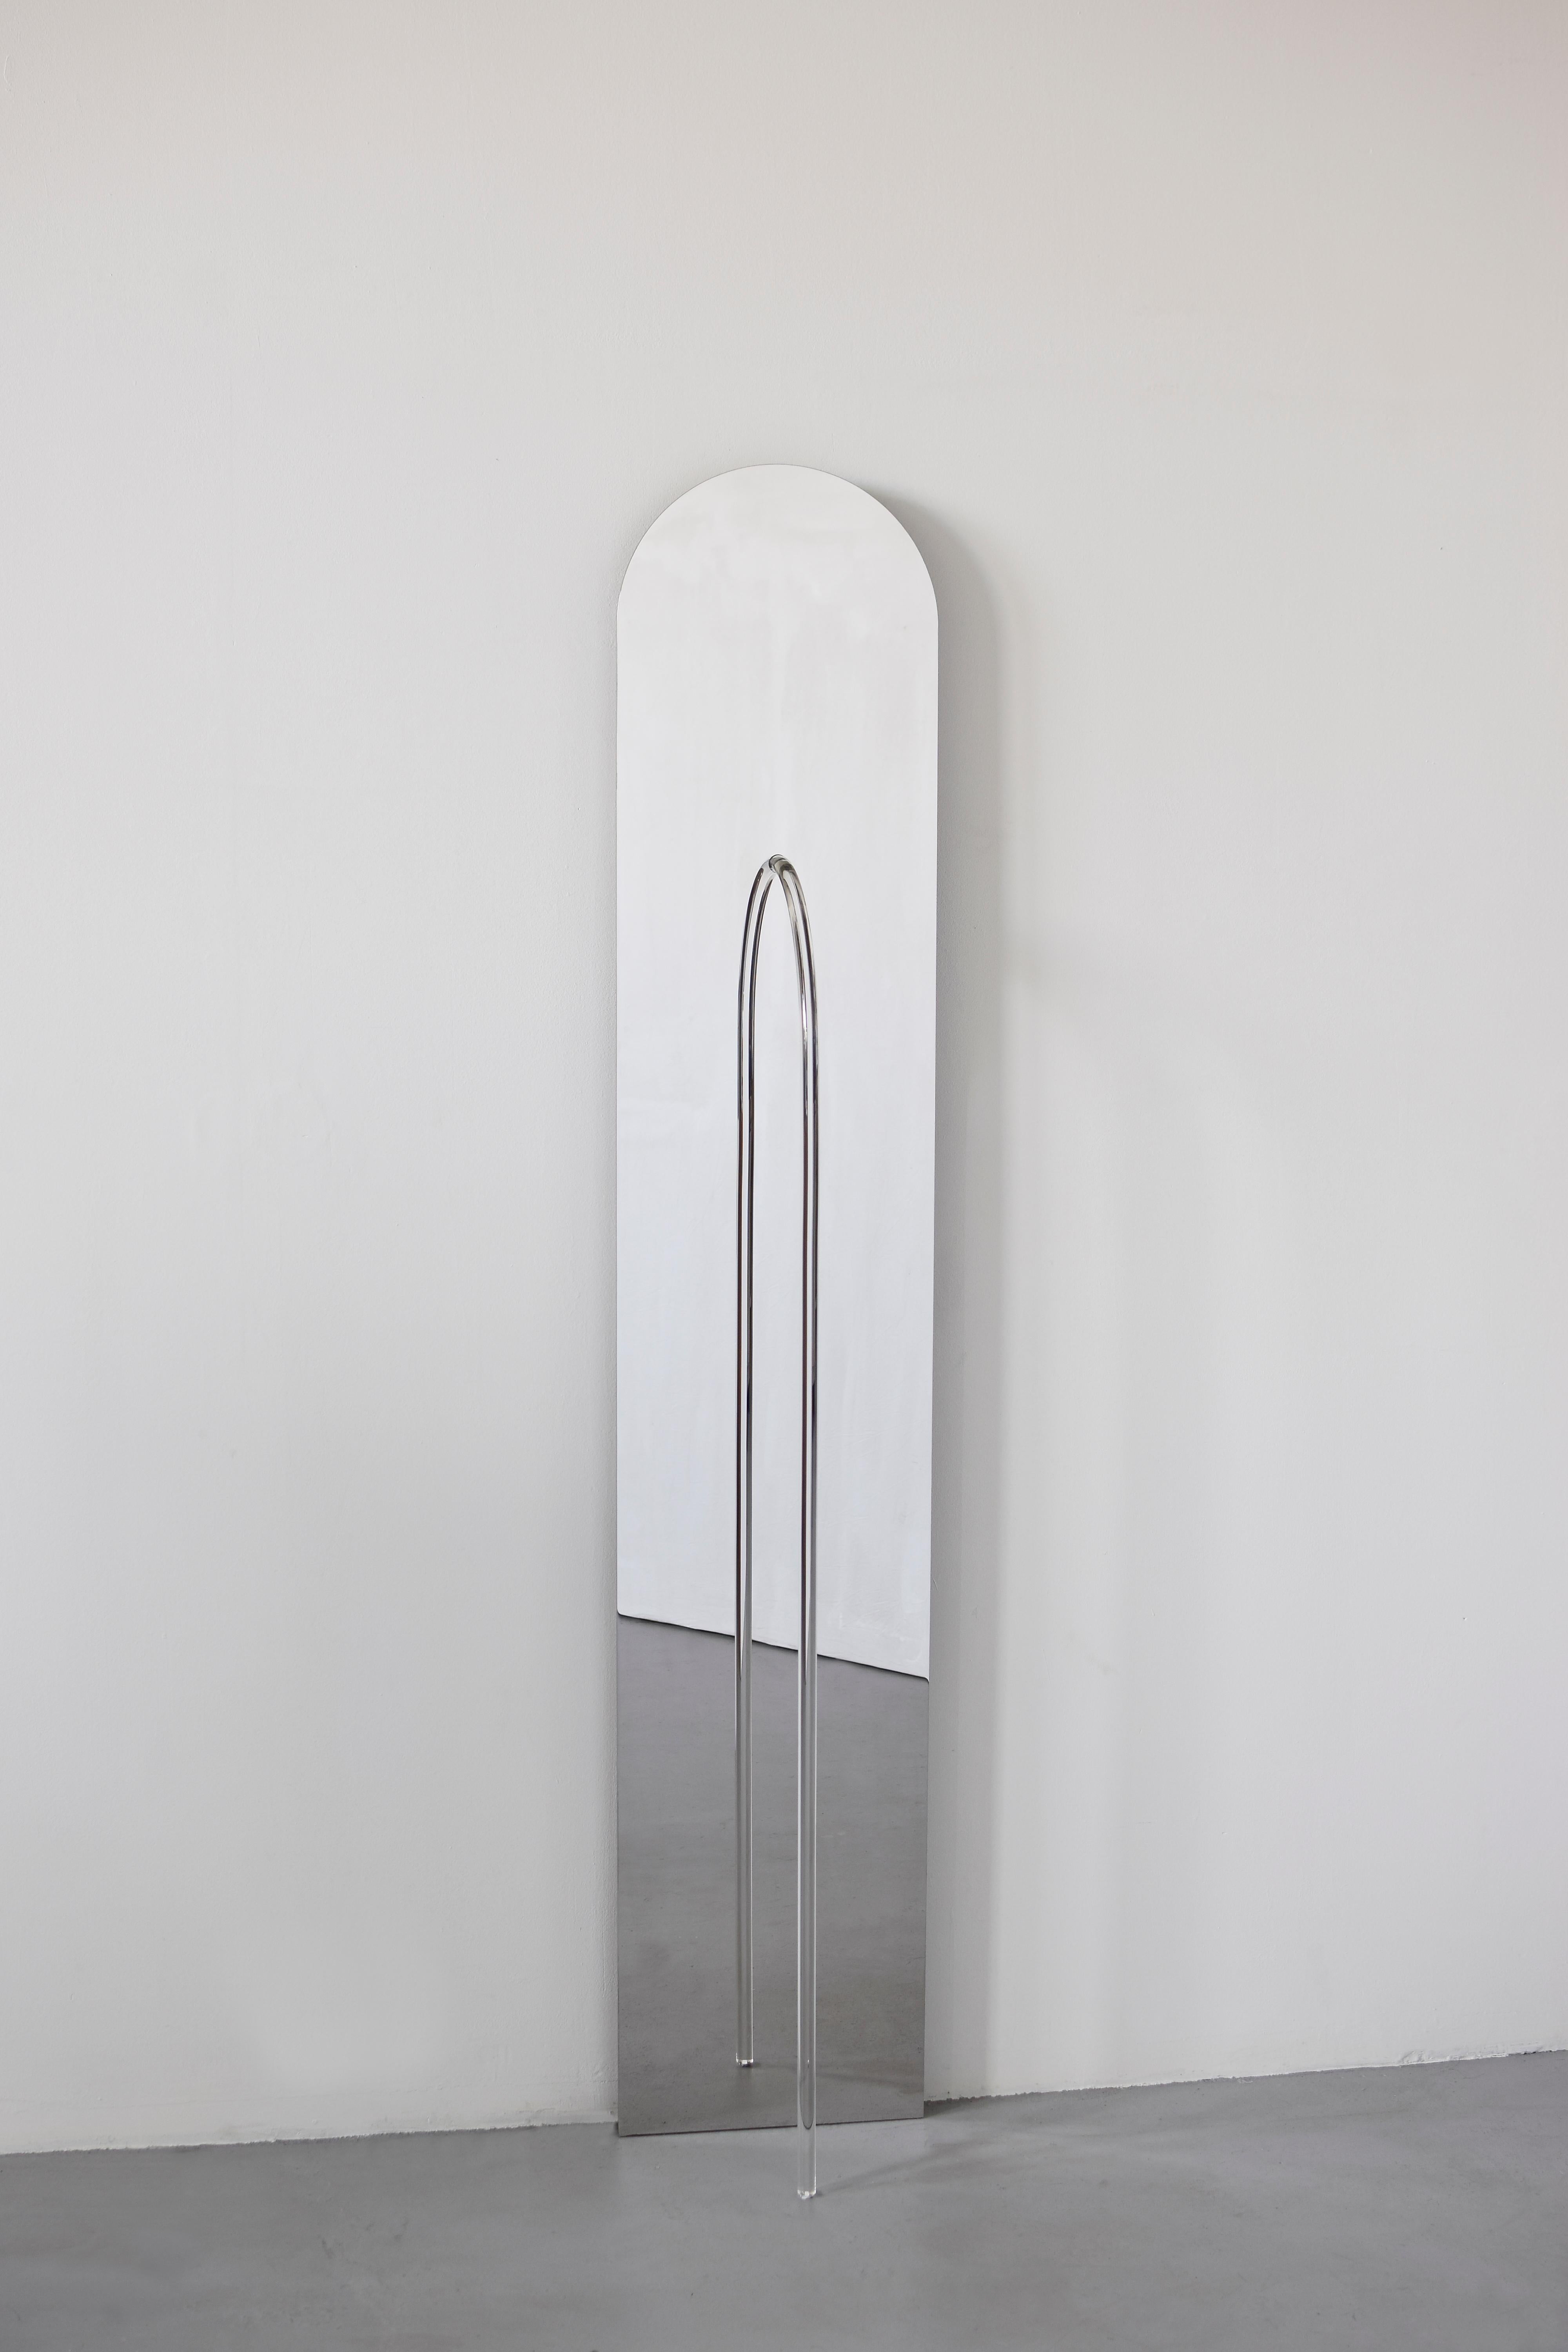 Original enlightened mirror - Maximilian Michaelis

Title: The elusive nature of perception, No. 05

Measures: ca. 36 x 190 x 26 cm

Material: polished stainless steel, Belgian bluestone, acrylic glass, Led

The basis and inspiration for Maximilian